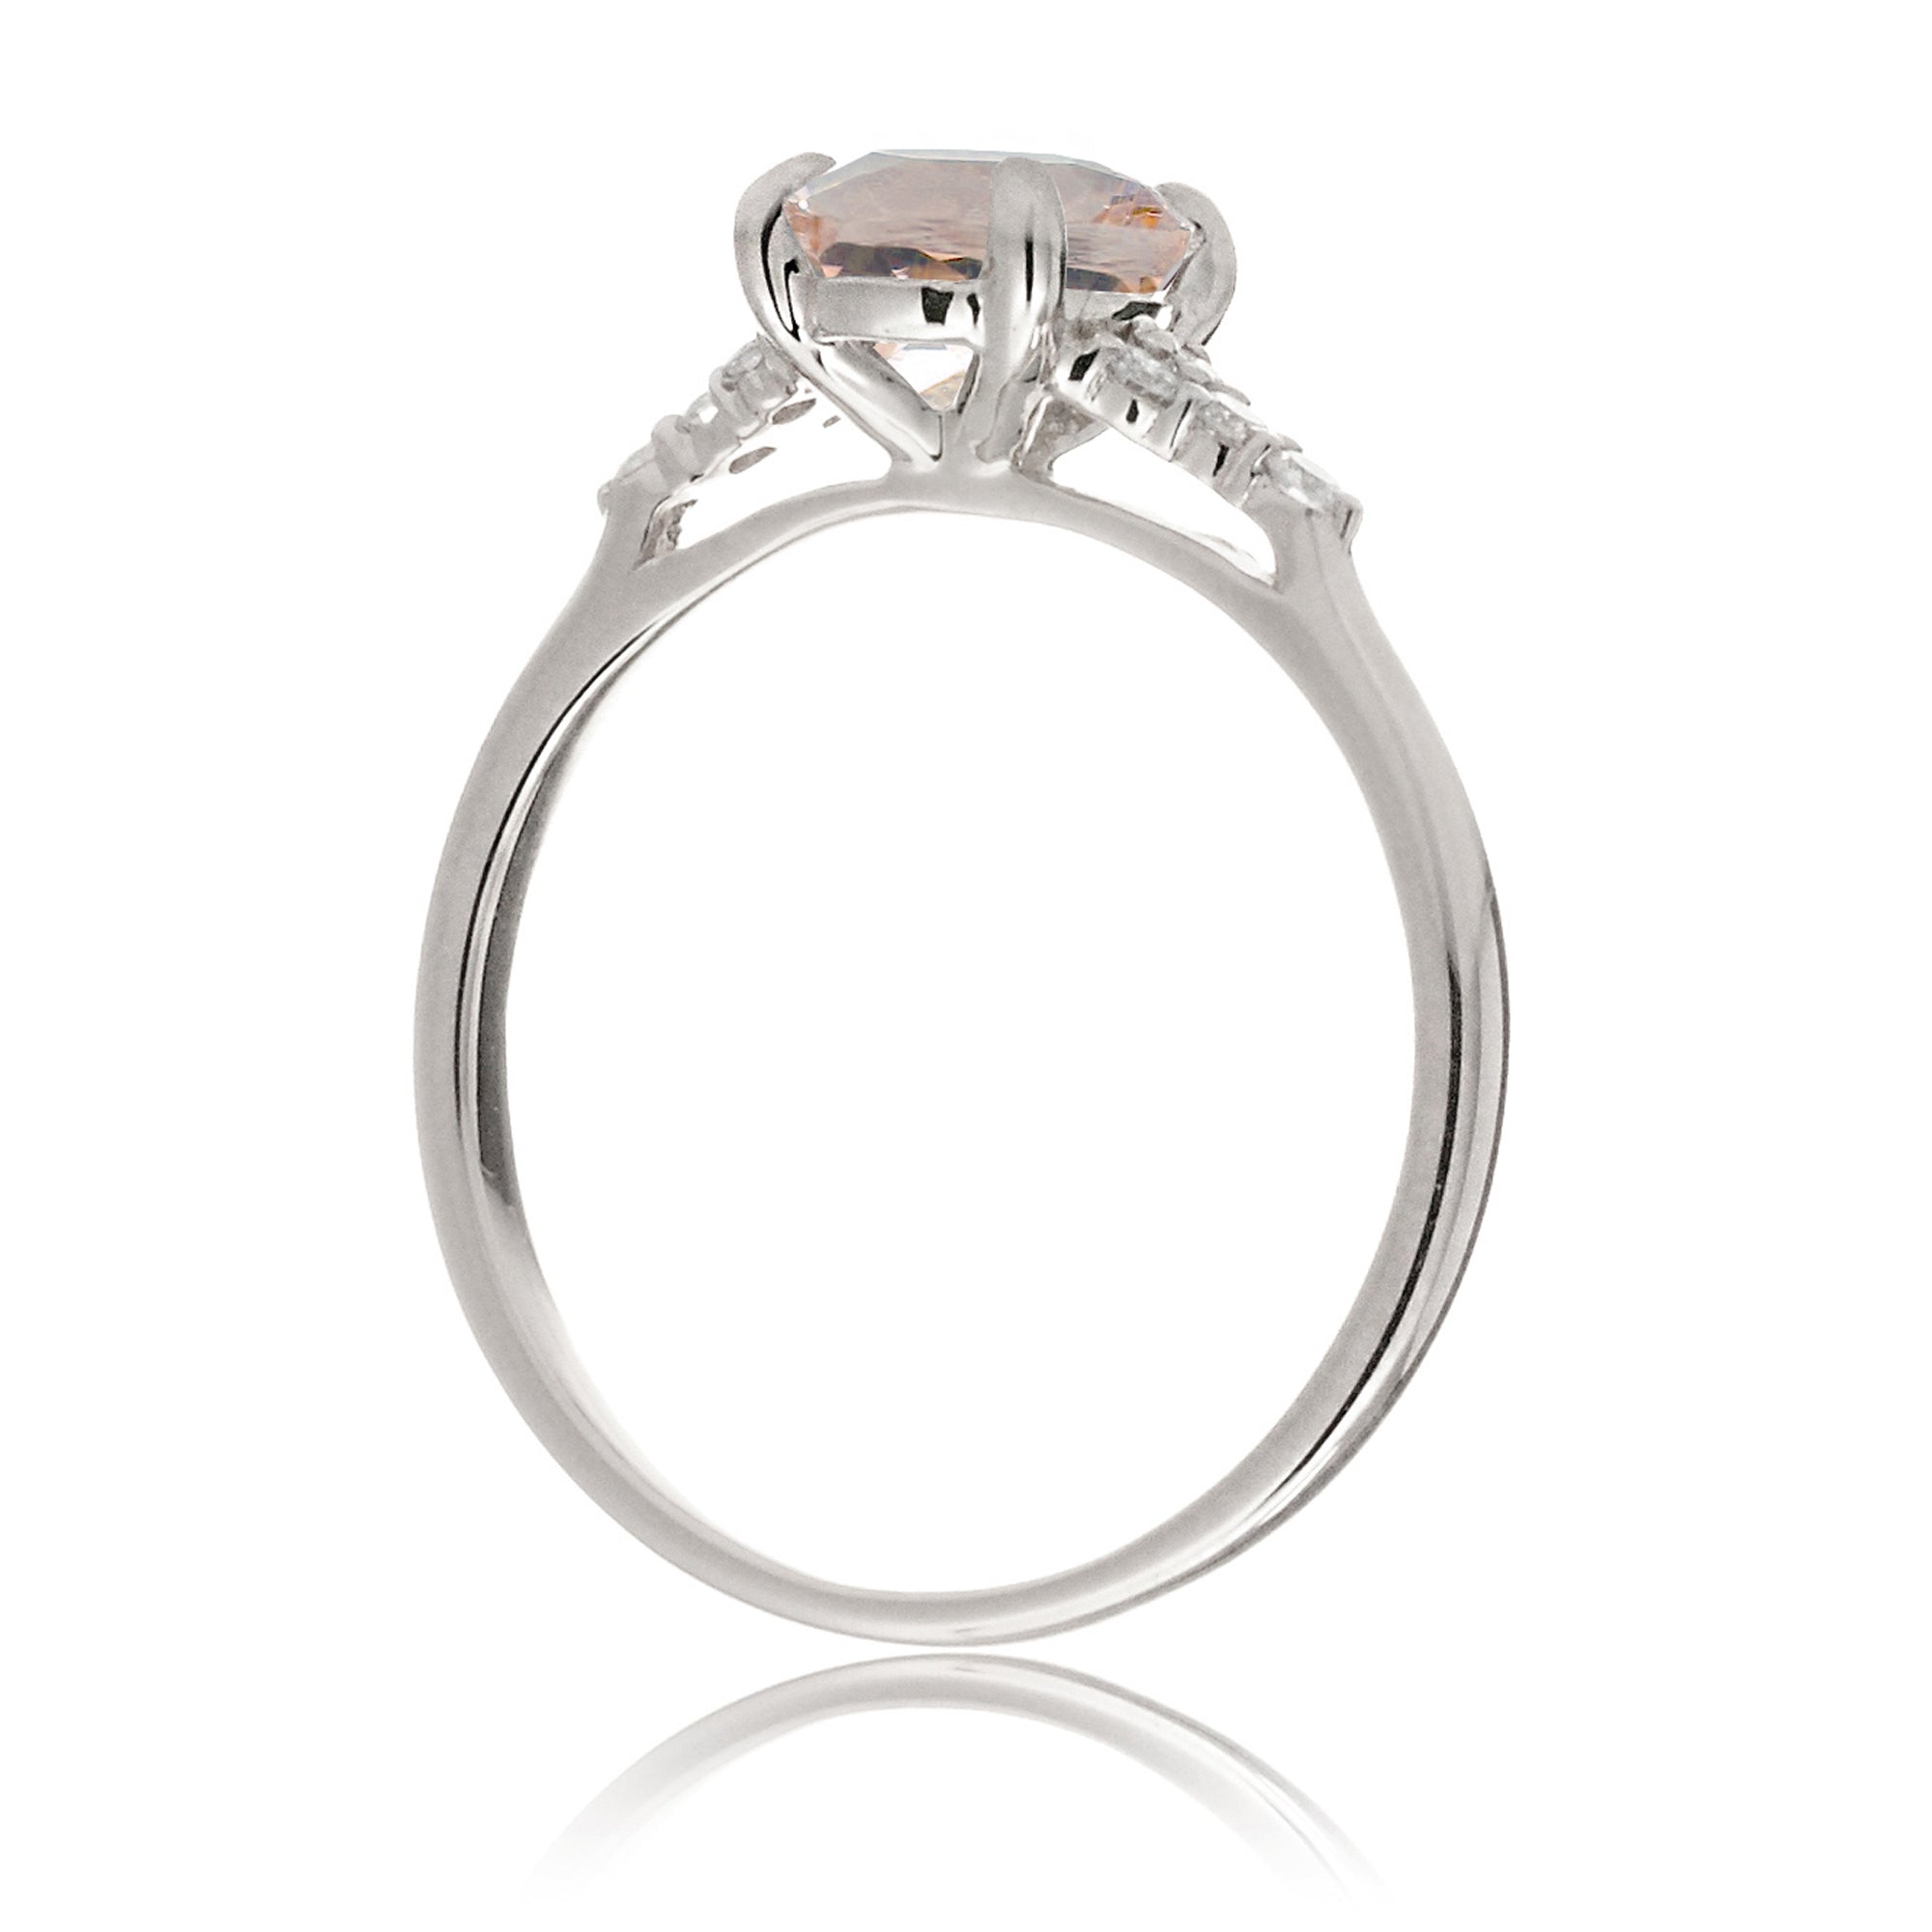 Round morganite ring with diamond accent in white gold